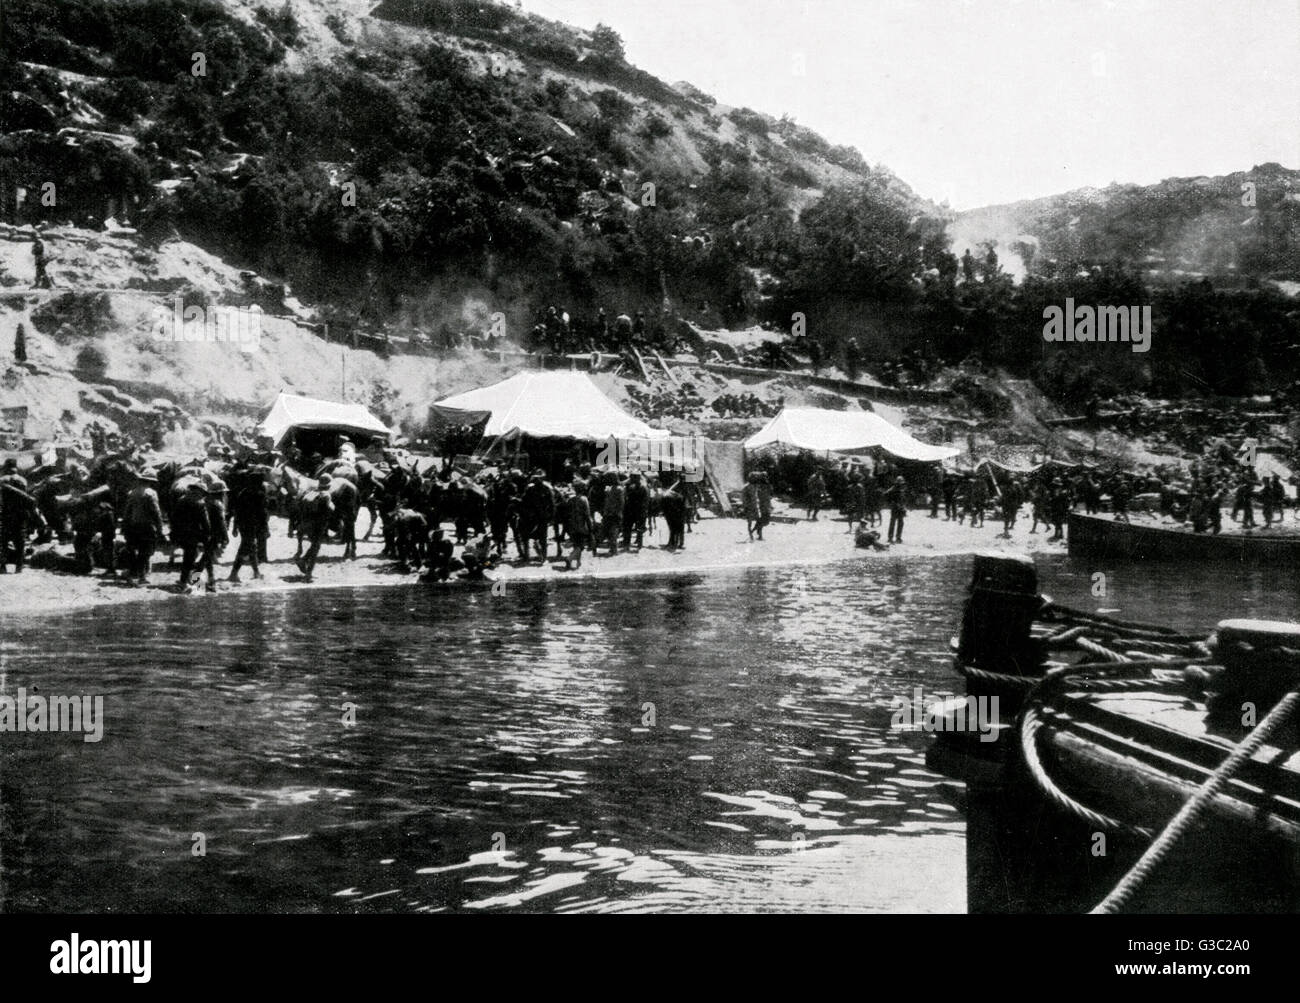 WW1 - The Australian and New Zealand Army Corps (ANZAC), was a First World War army corps of the Mediterranean Expeditionary Force that was formed in Egypt in 1915 and operated during the Battle of Gallipoli. Here the ANZACs are at their landing beach and Stock Photo